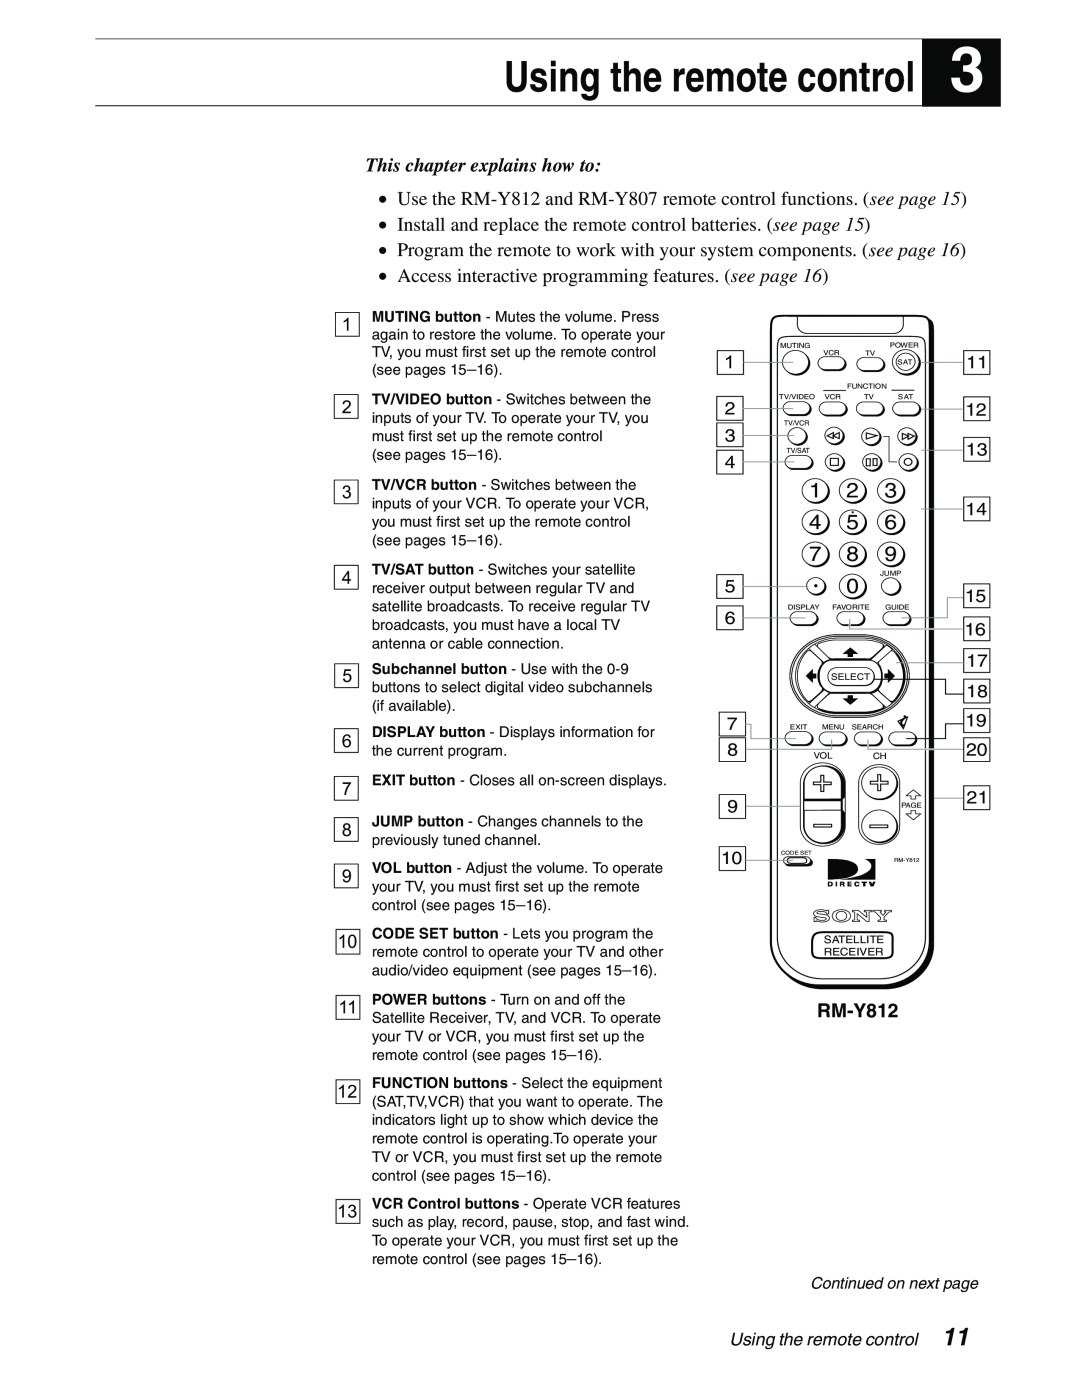 Sony SAT-B65 Using the remote control, This chapter explains how to, Access interactive programming features. see page 